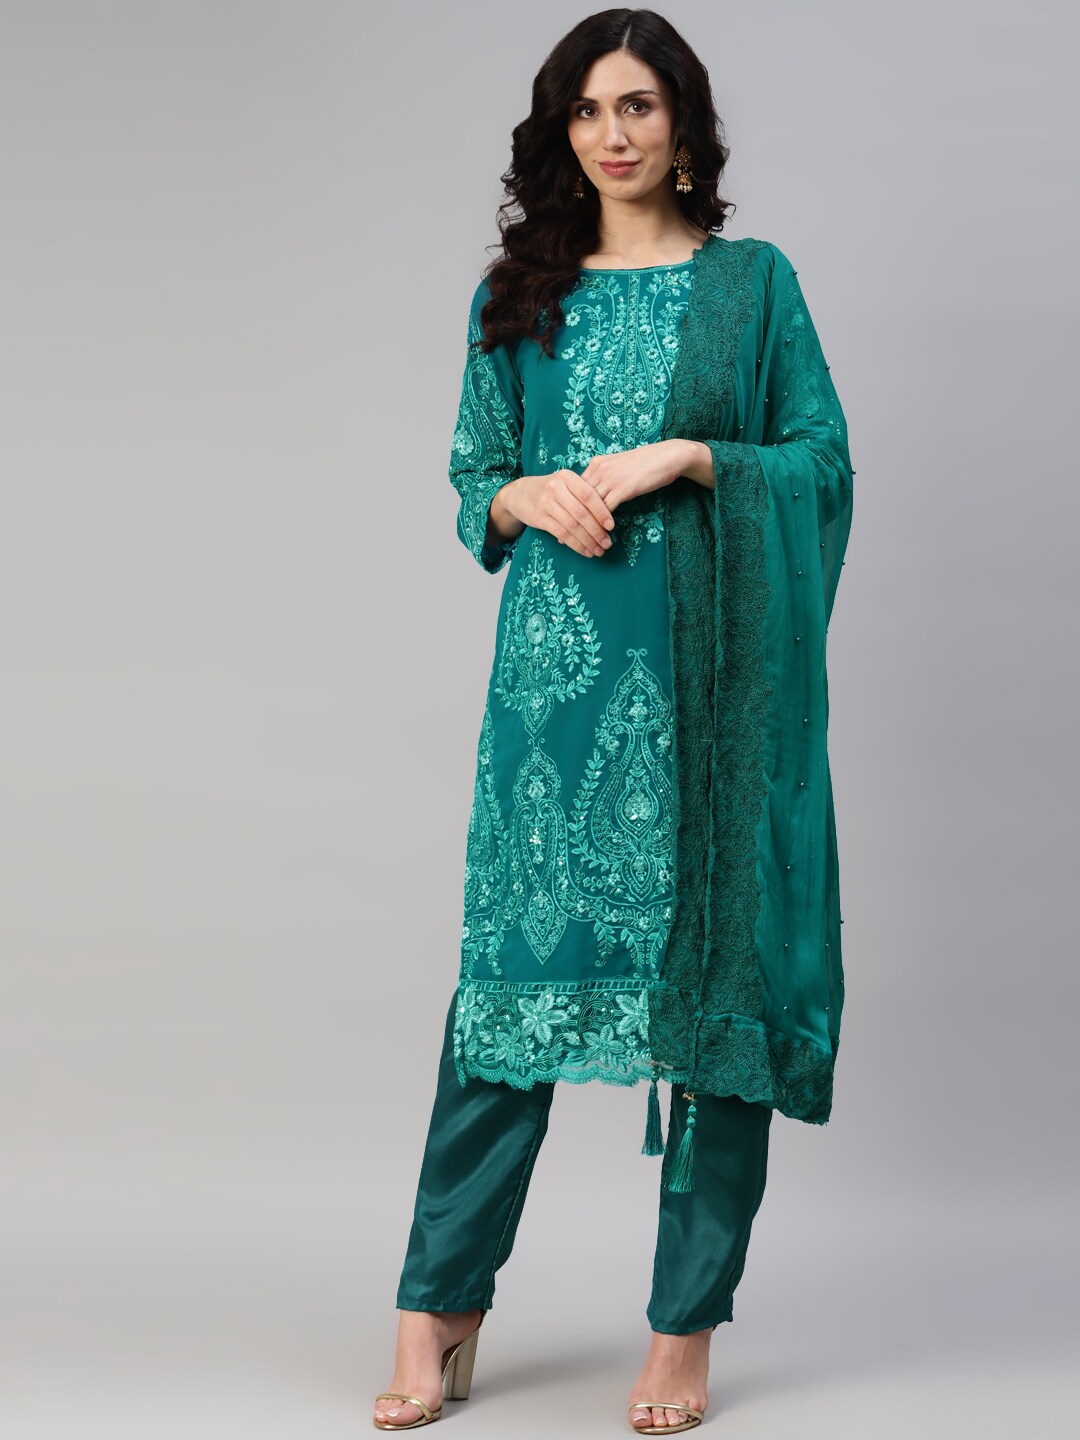 Readiprint Fashions Embroidered Semi-Stitched Dress Material